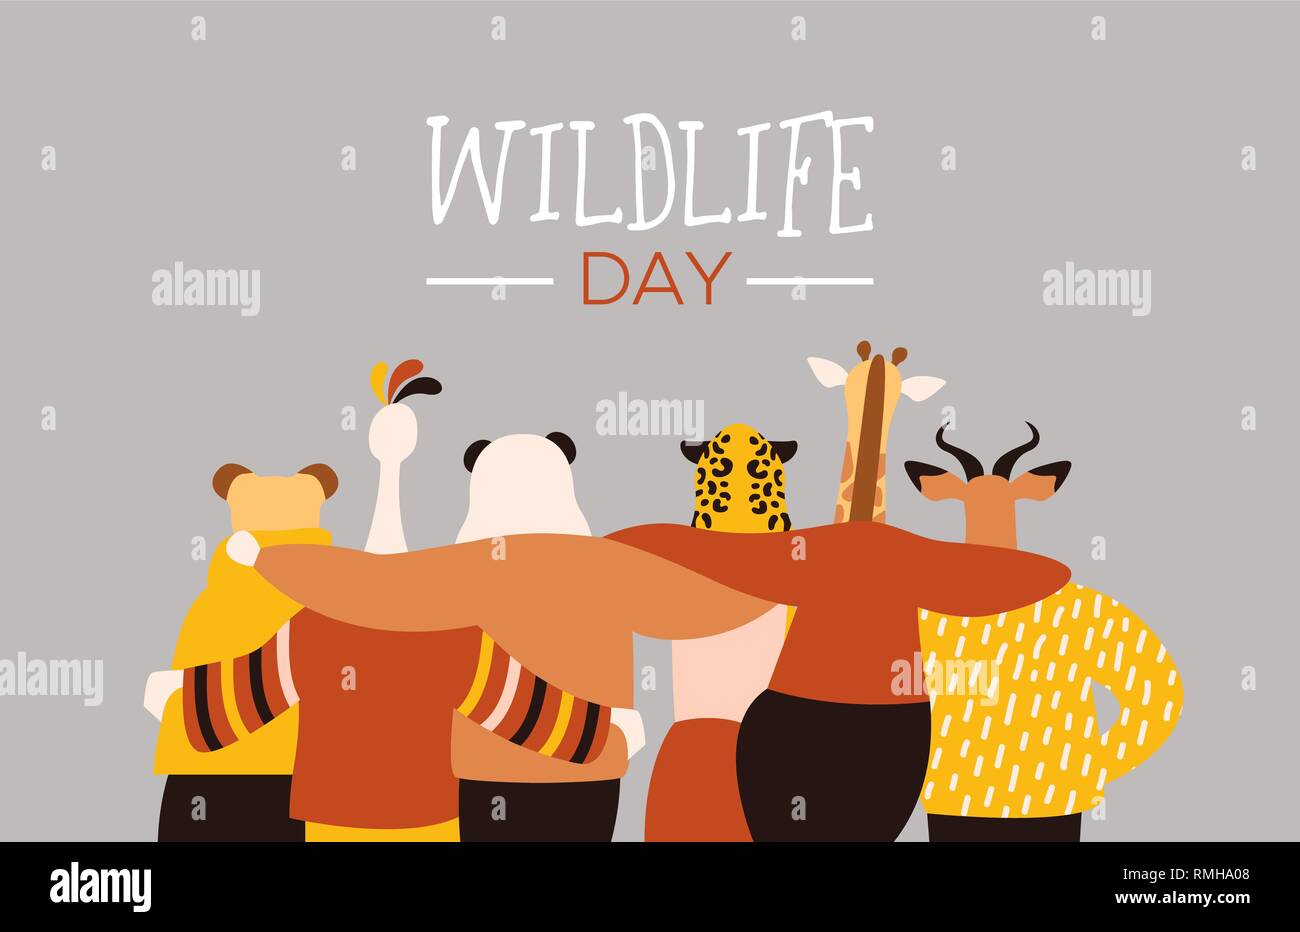 Happy wildlife day illustration with exotic animal friend group as people hugging together. Help and wild life conservation awareness concept. Stock Vector